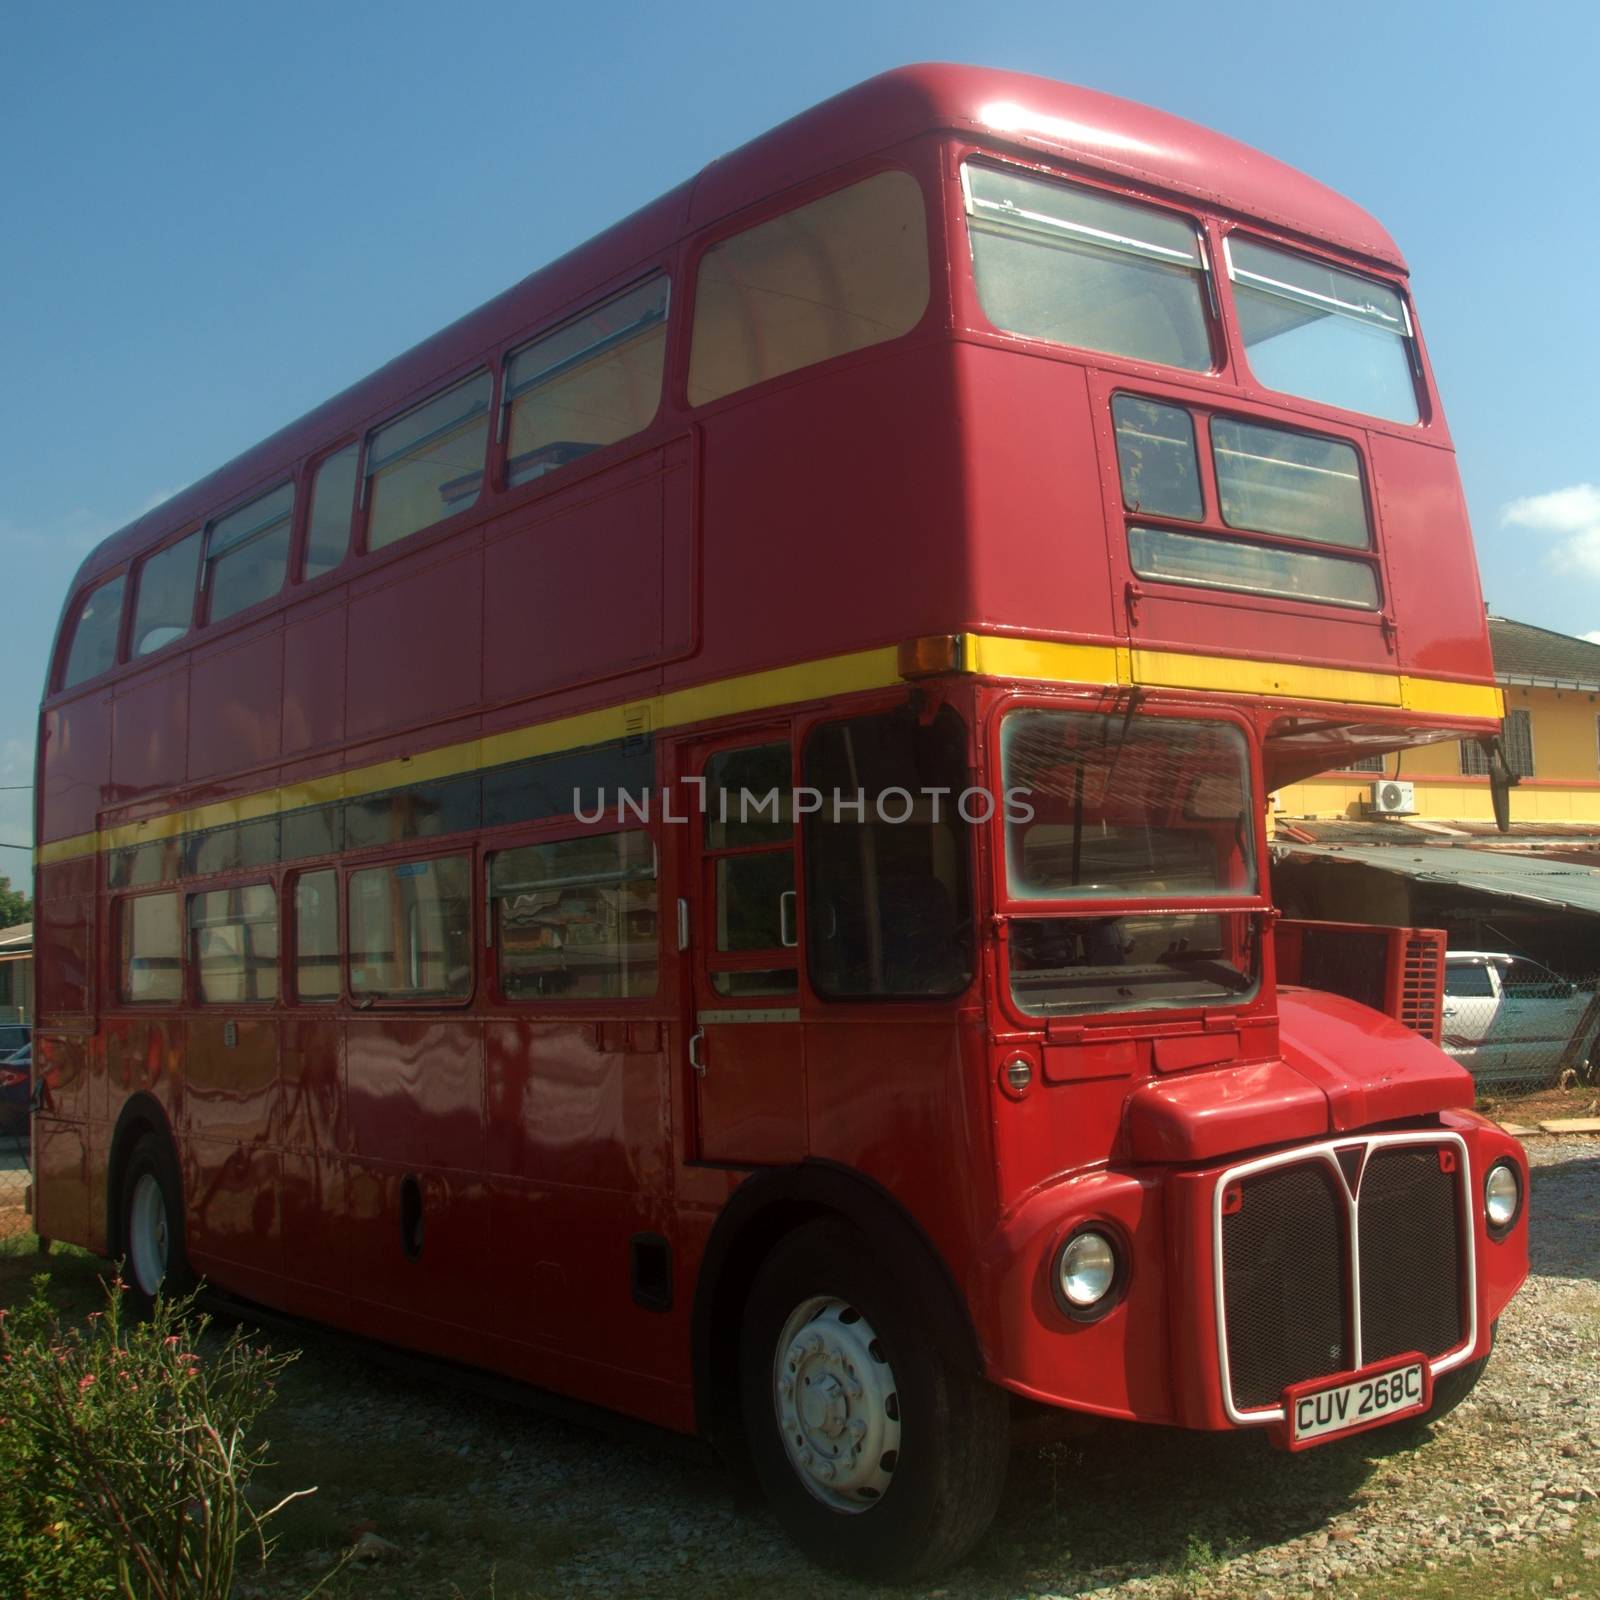 double decker red bus by malaysiaguy